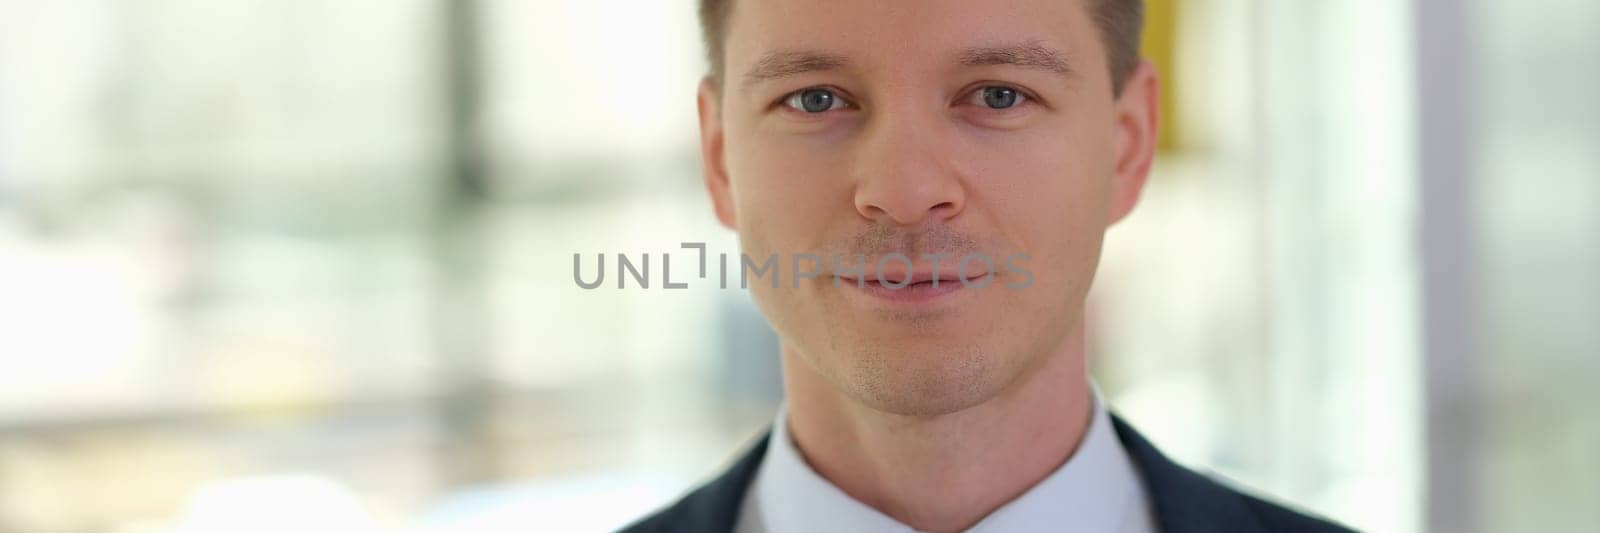 Portrait of young handsome businessman in suit with tie in office. Business career concept